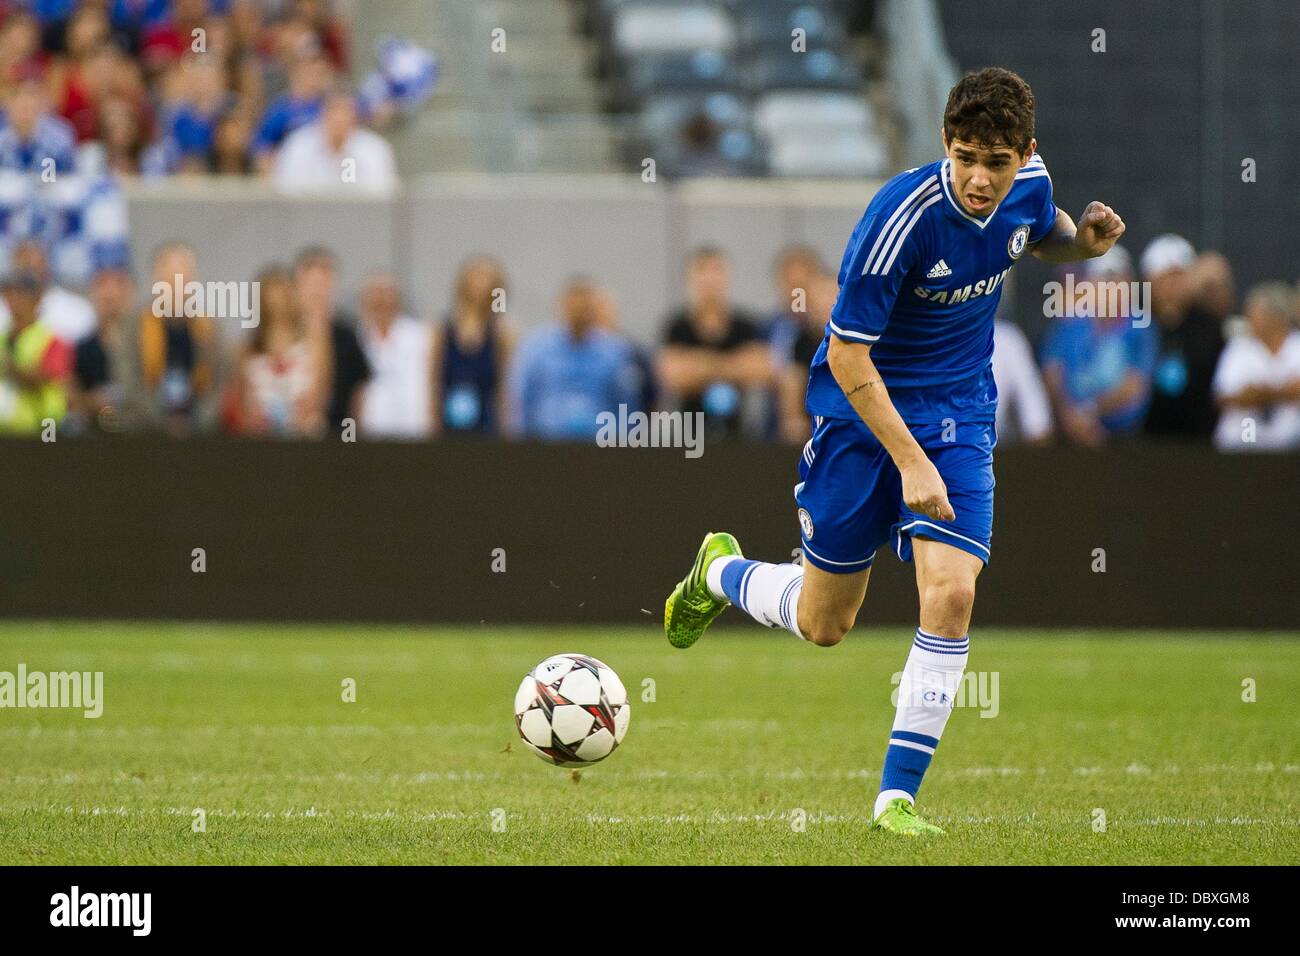 East Rutherford, New Jersey, USA. 4th Aug, 2013. August 04, 2013: Chelsea midfielder Oscar (11) stumbles with the ball during the Guinness International Champions Cup match between A.C. Milan and Chelsea at Met Life Stadium, East Rutherford, NJ. © csm/Alamy Live News Stock Photo